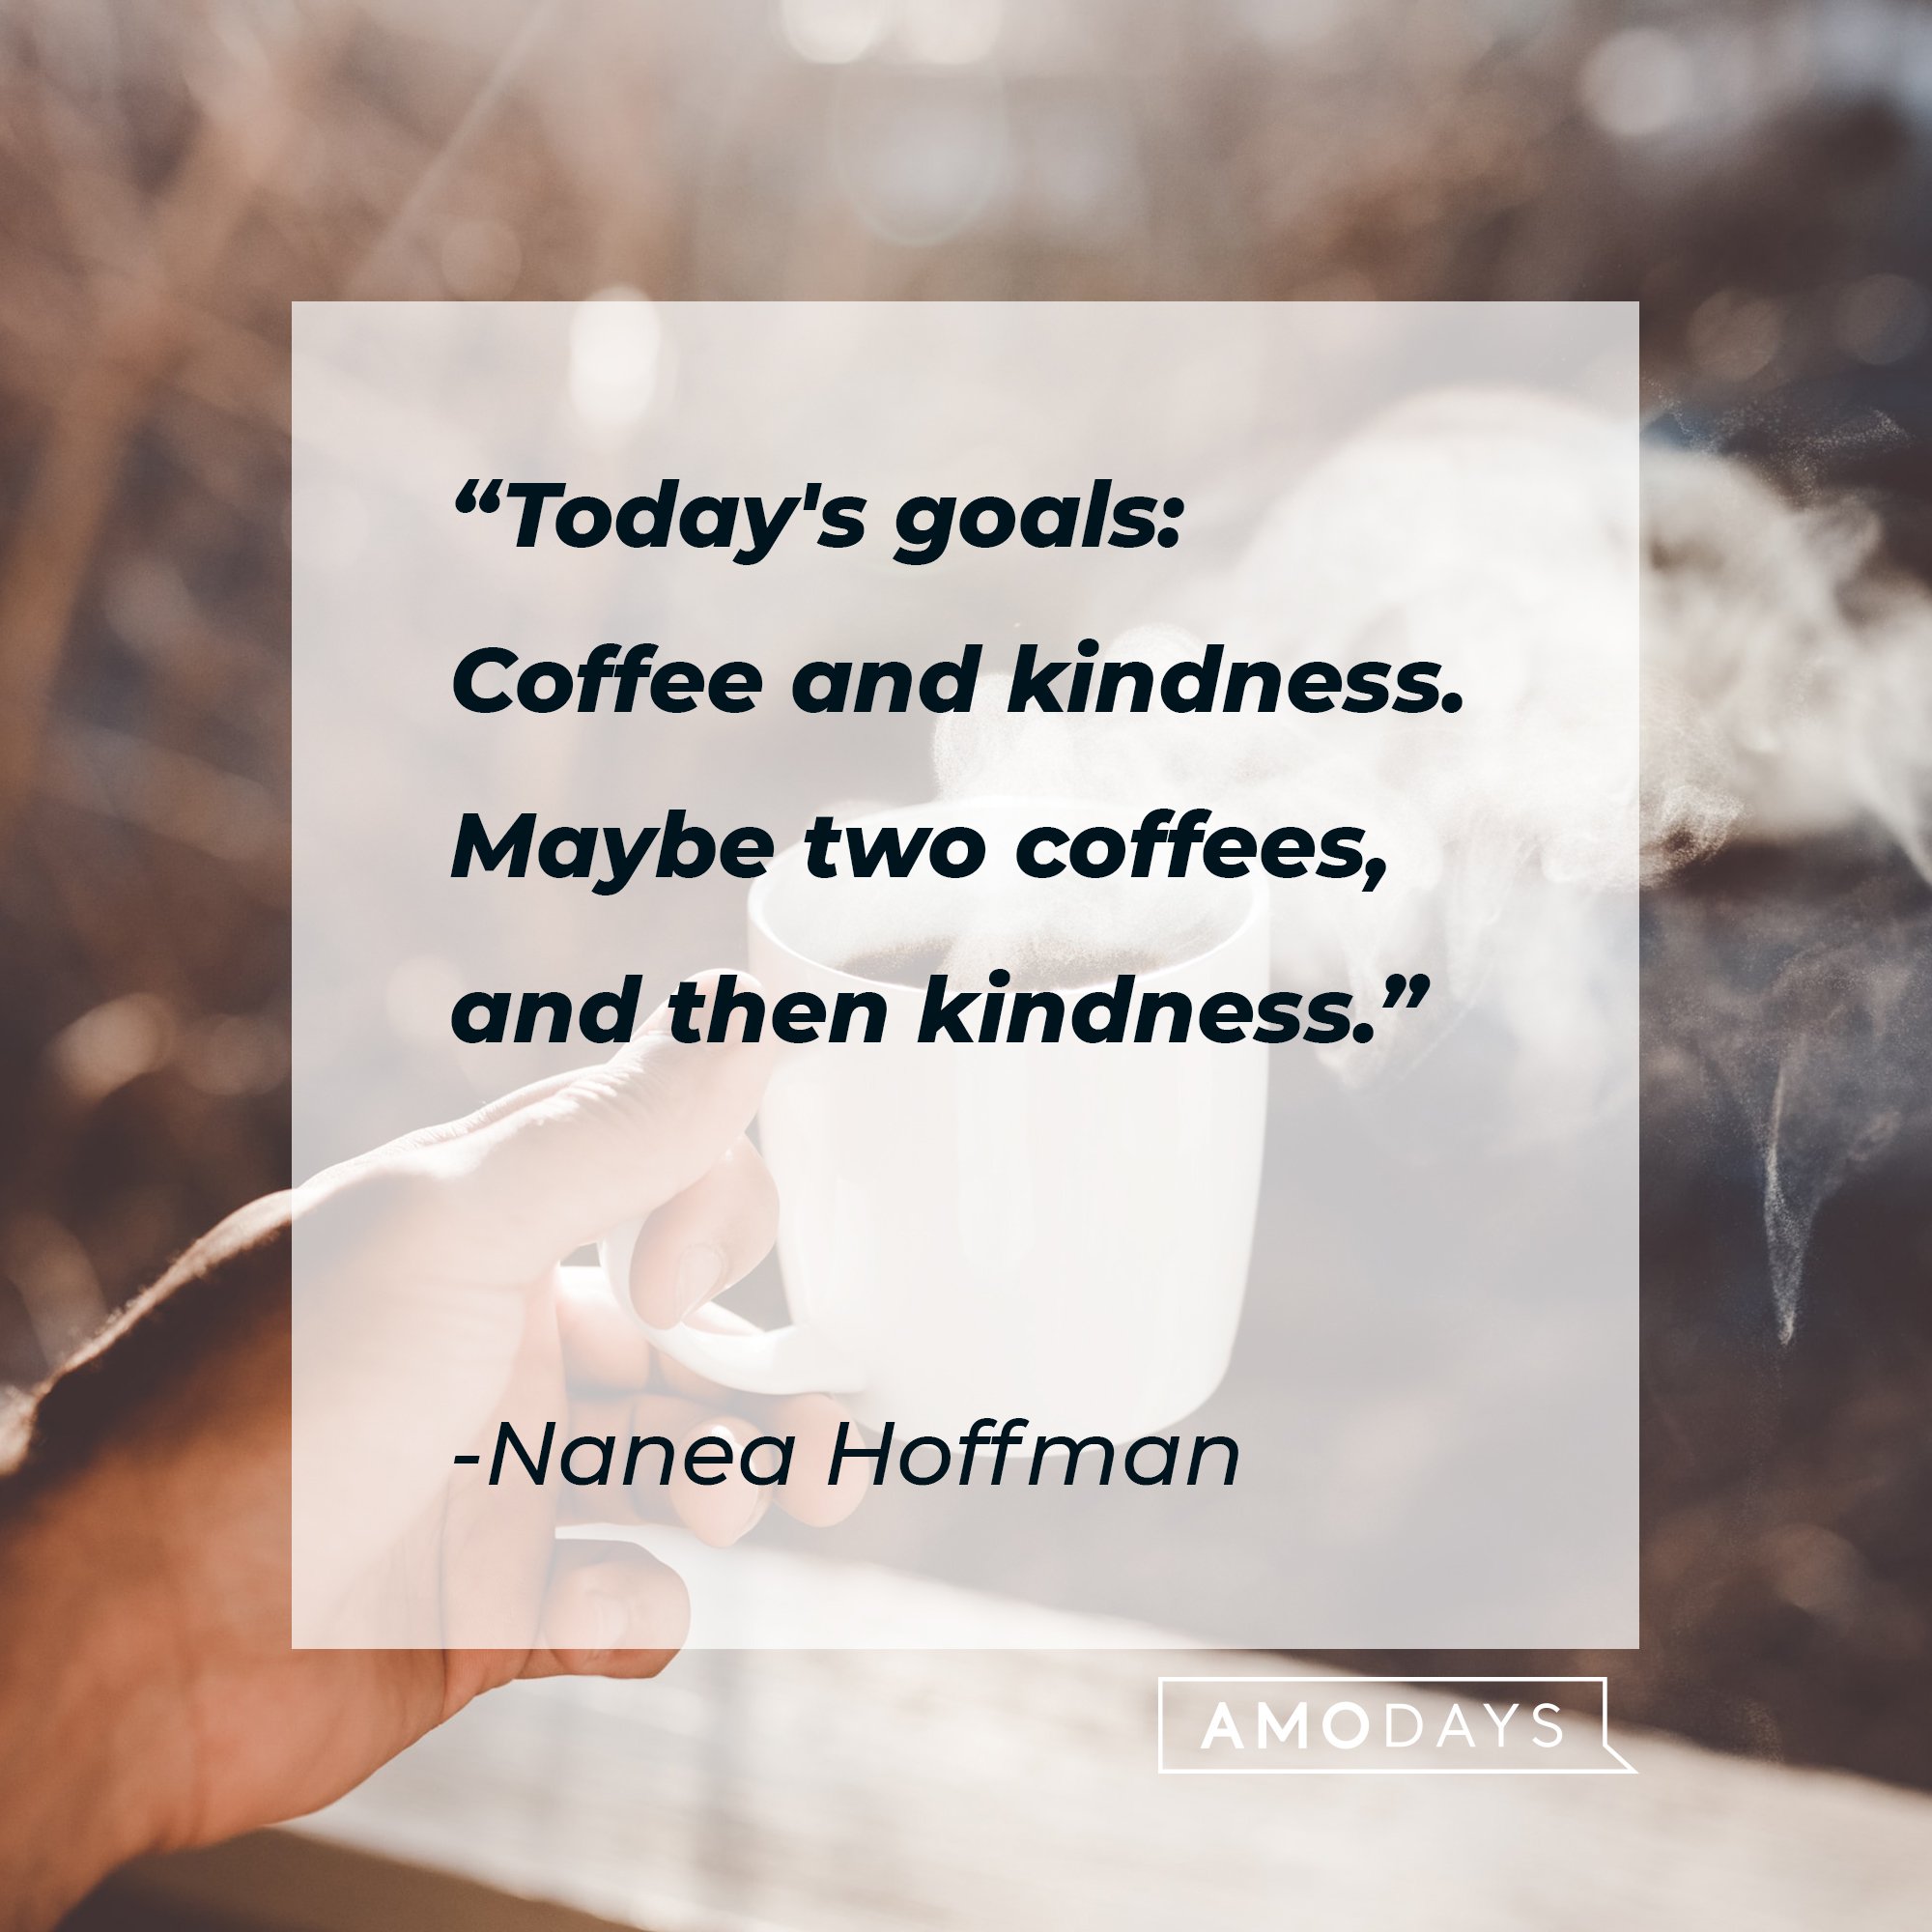 Nanea Hoffman’s quote: "Today's goals: Coffee and kindness. Maybe two coffees, and then kindness." | Image: AmoDays 